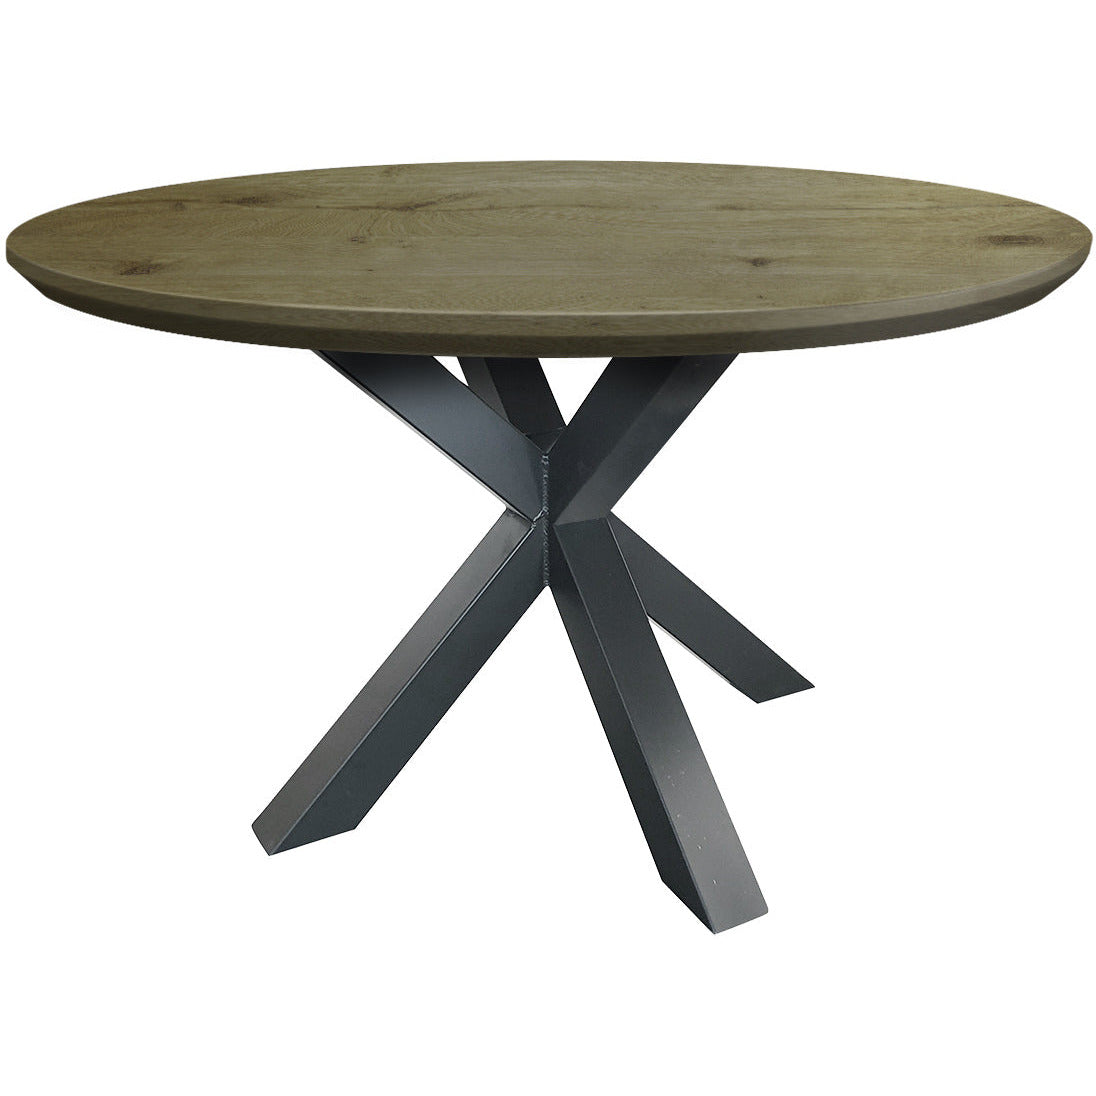 Dining table | Round | Greywash | Oak wood | Lacquered Spider Leg |